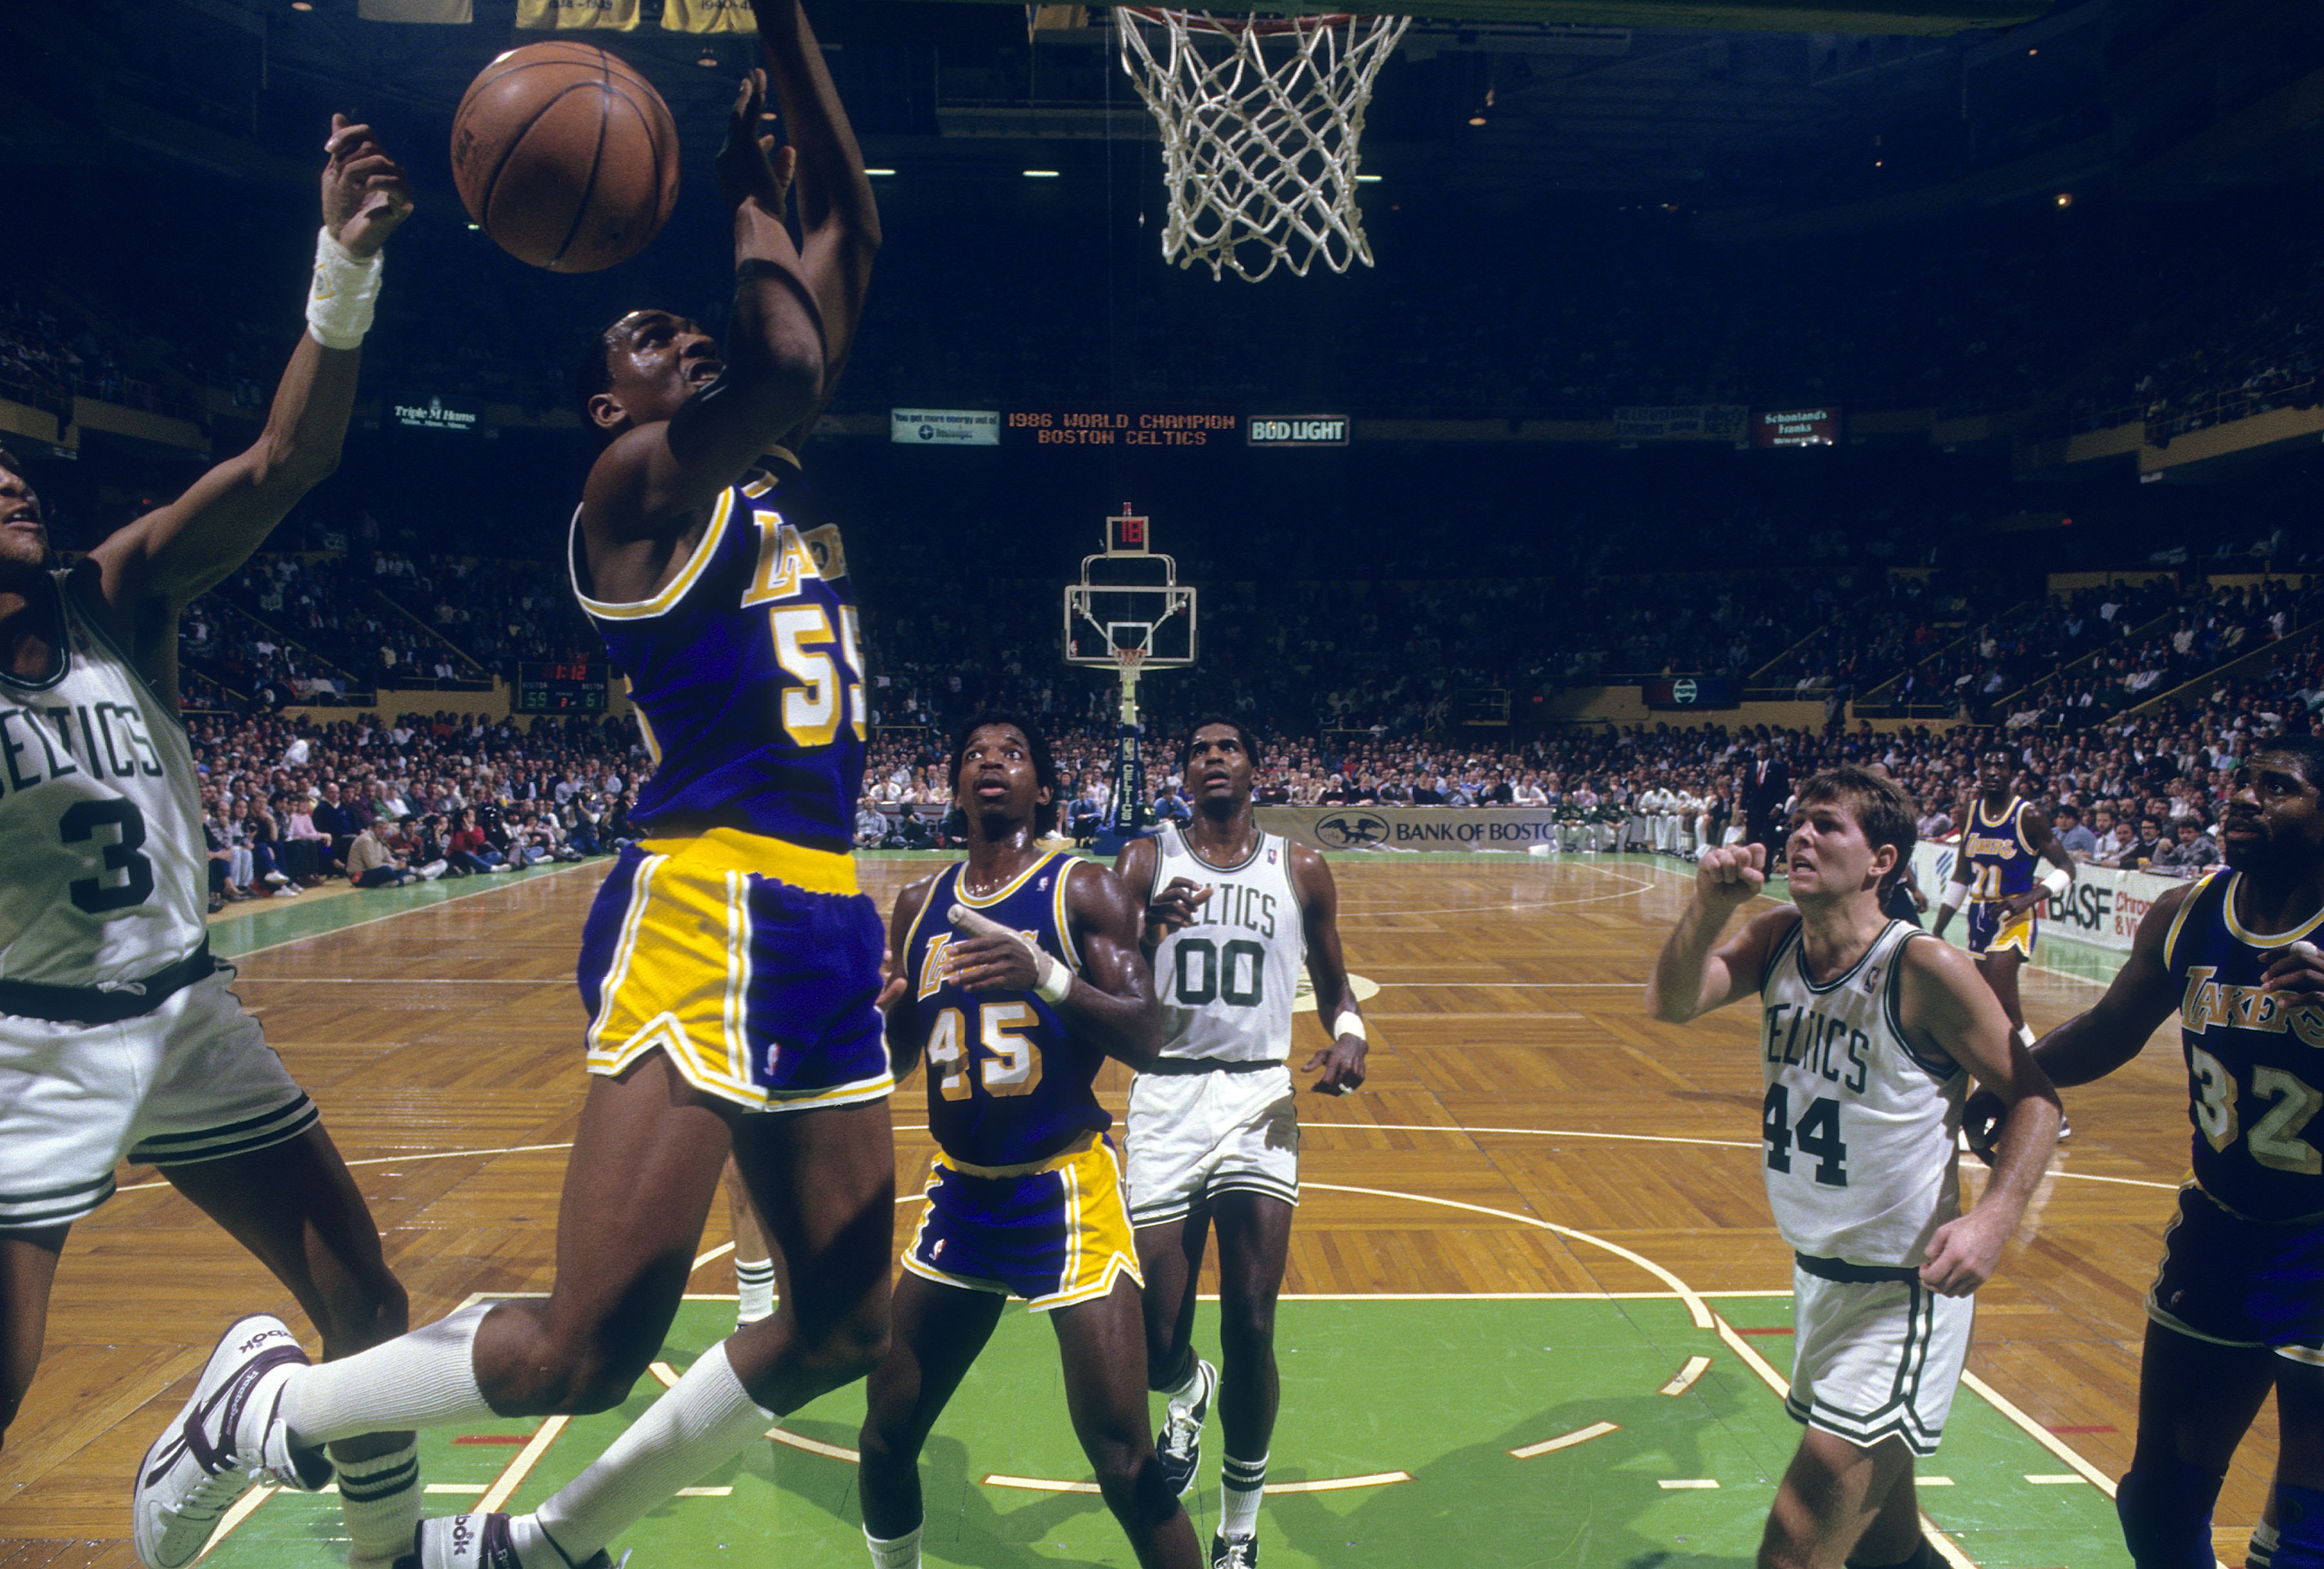 Billy Thompson of the Los Angeles Lakers battles for a rebound with Dennis Johnson of the Boston Celtics.